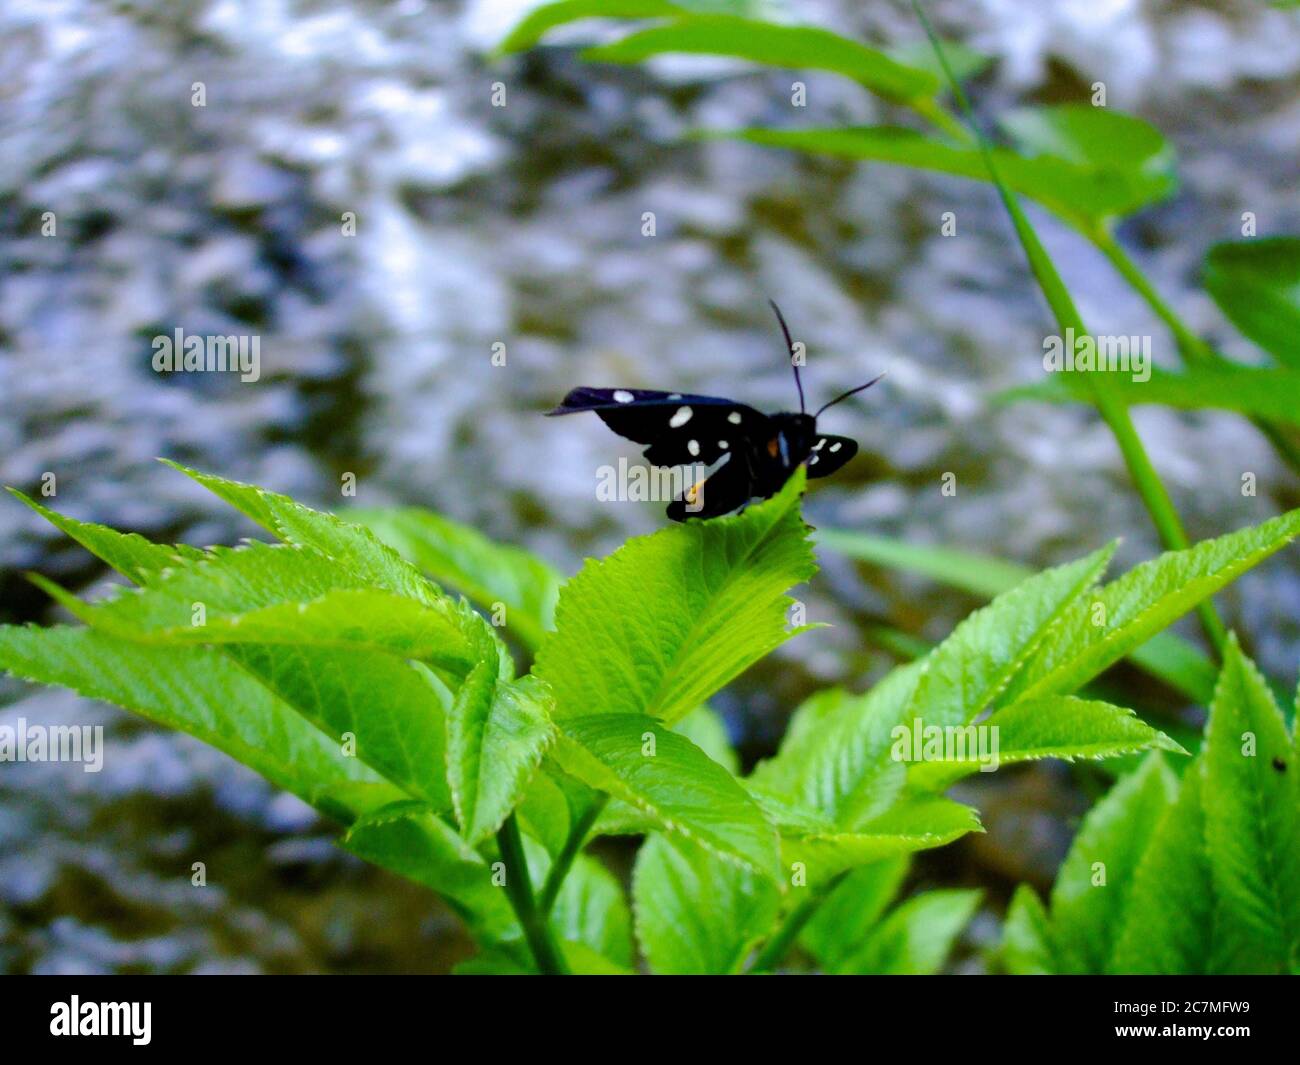 Closeup shot of a black white-spotted brush-footed butterfly on a green leaf with a rocky background Stock Photo